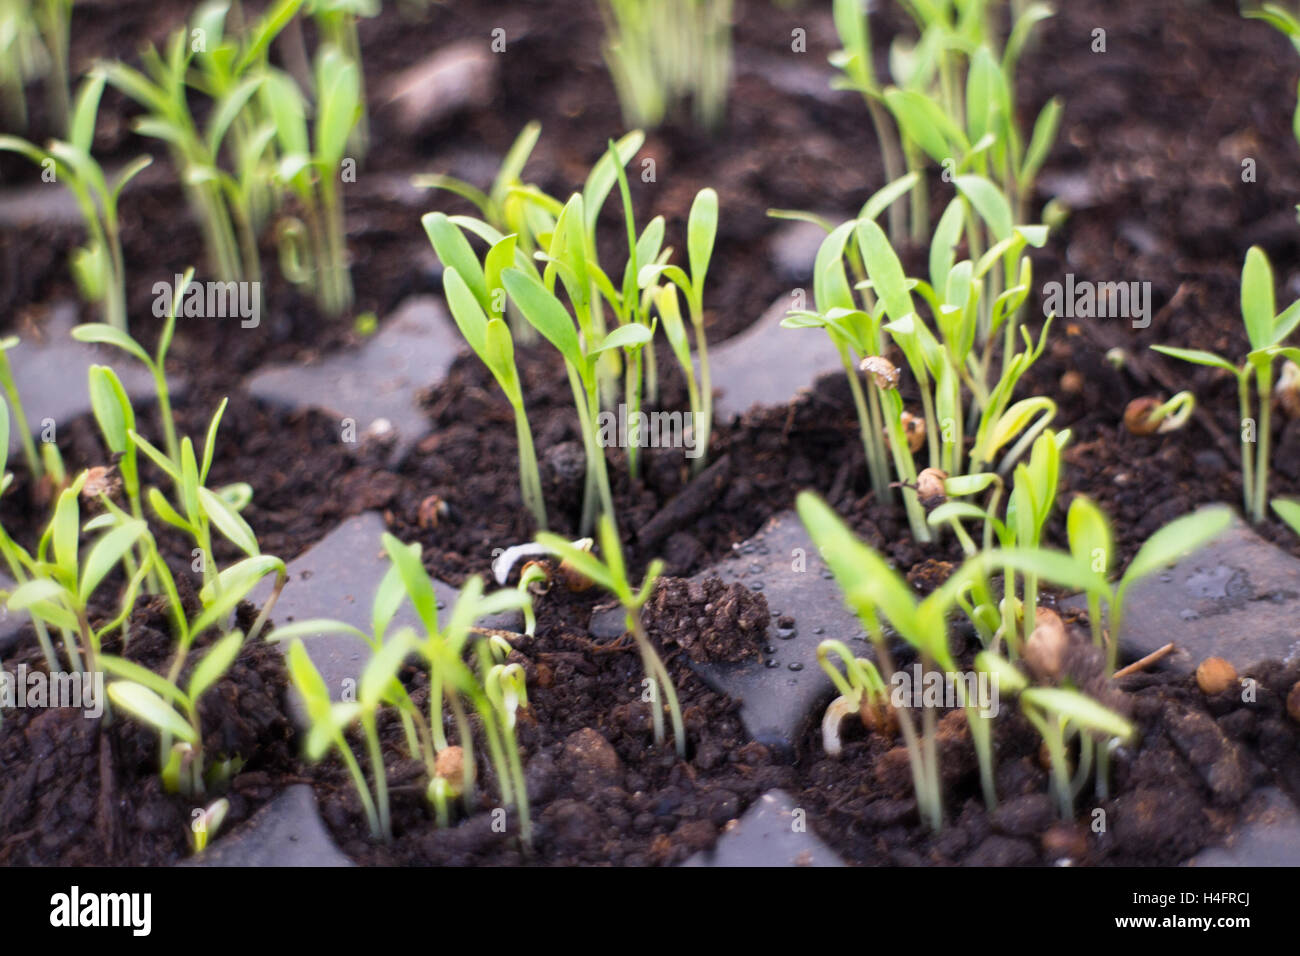 Small green plants growing in soil, farm inspired Stock Photo